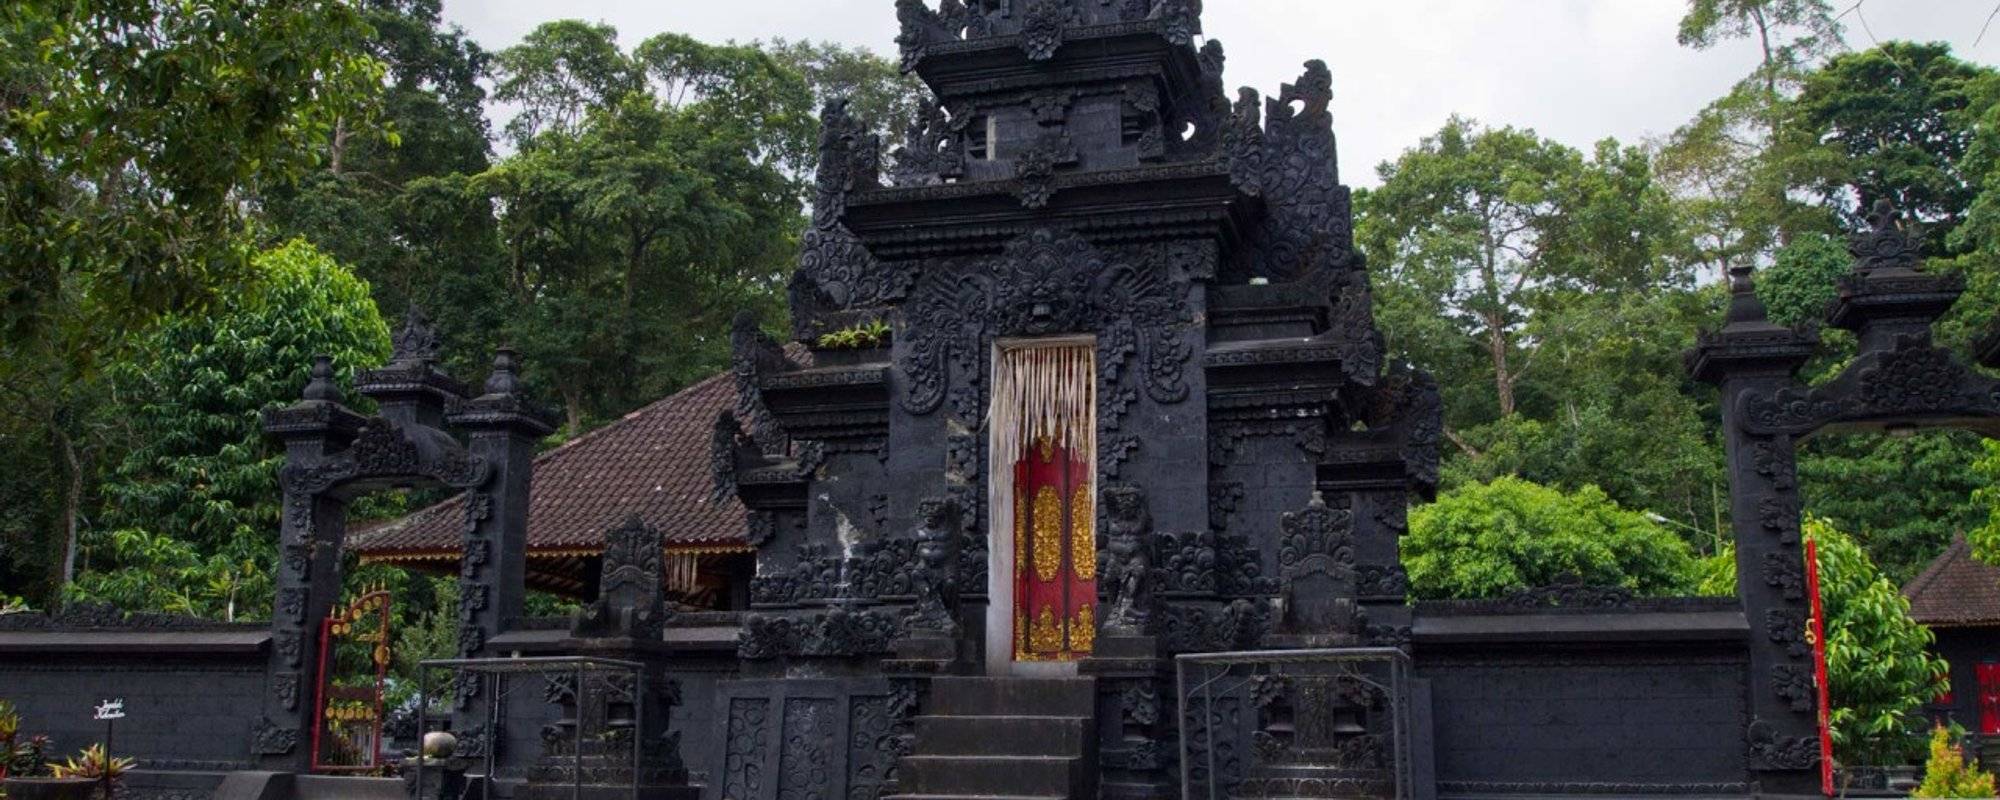 Balinese temples on Lombok? Yes! And they are really beautiful!